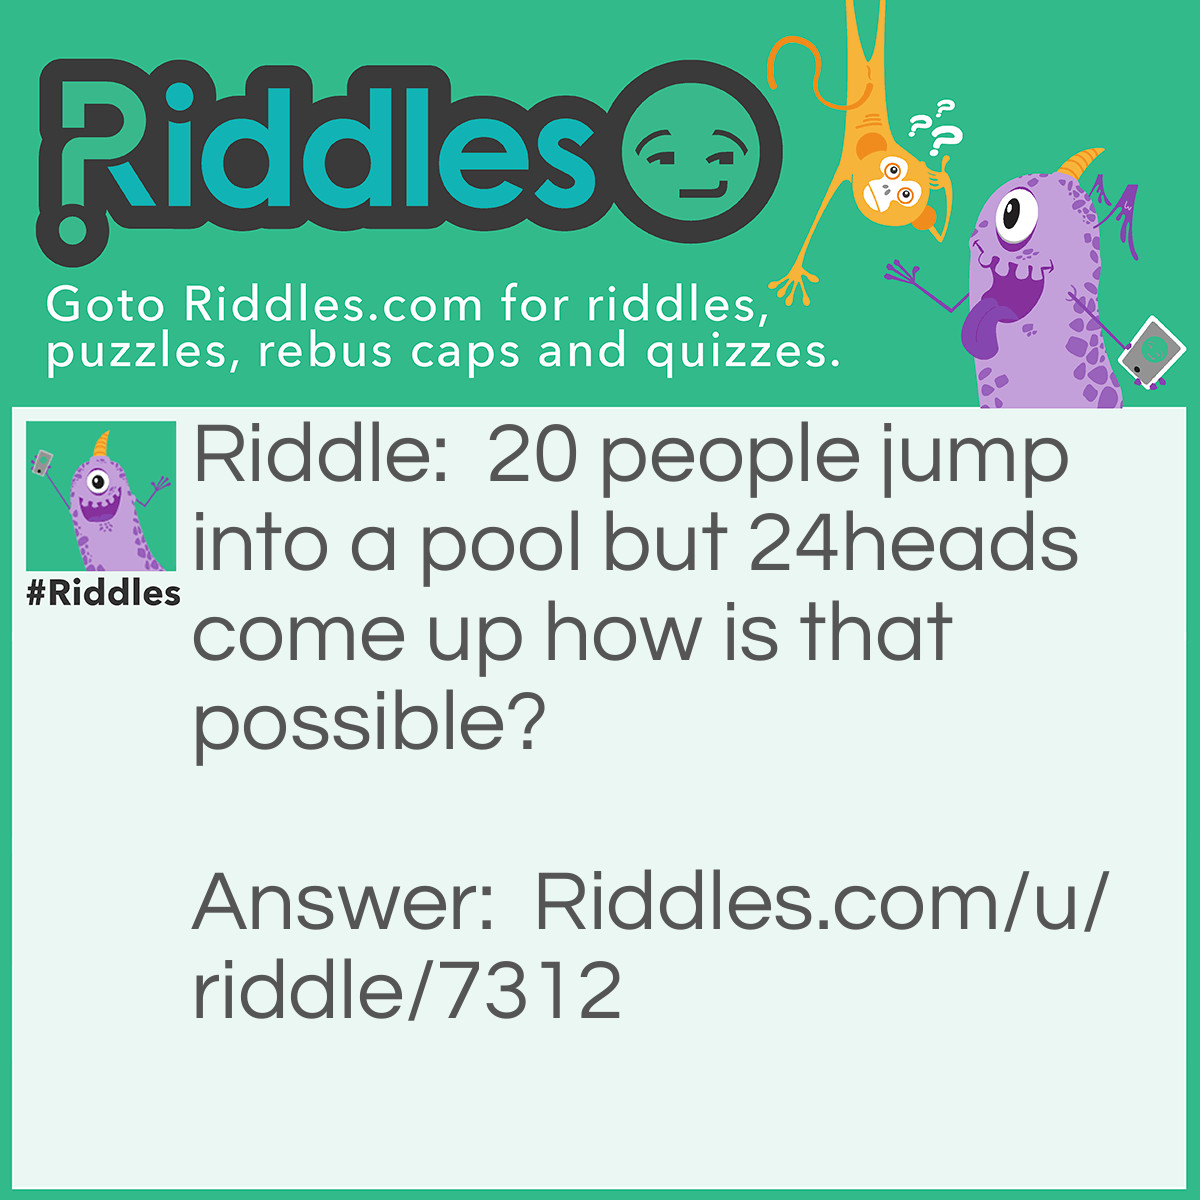 Riddle: 20 people jump into a pool but 24heads come up how is that possible? Answer: Twenty people jump into a pool and twenty FORE-HEADS come up!!!